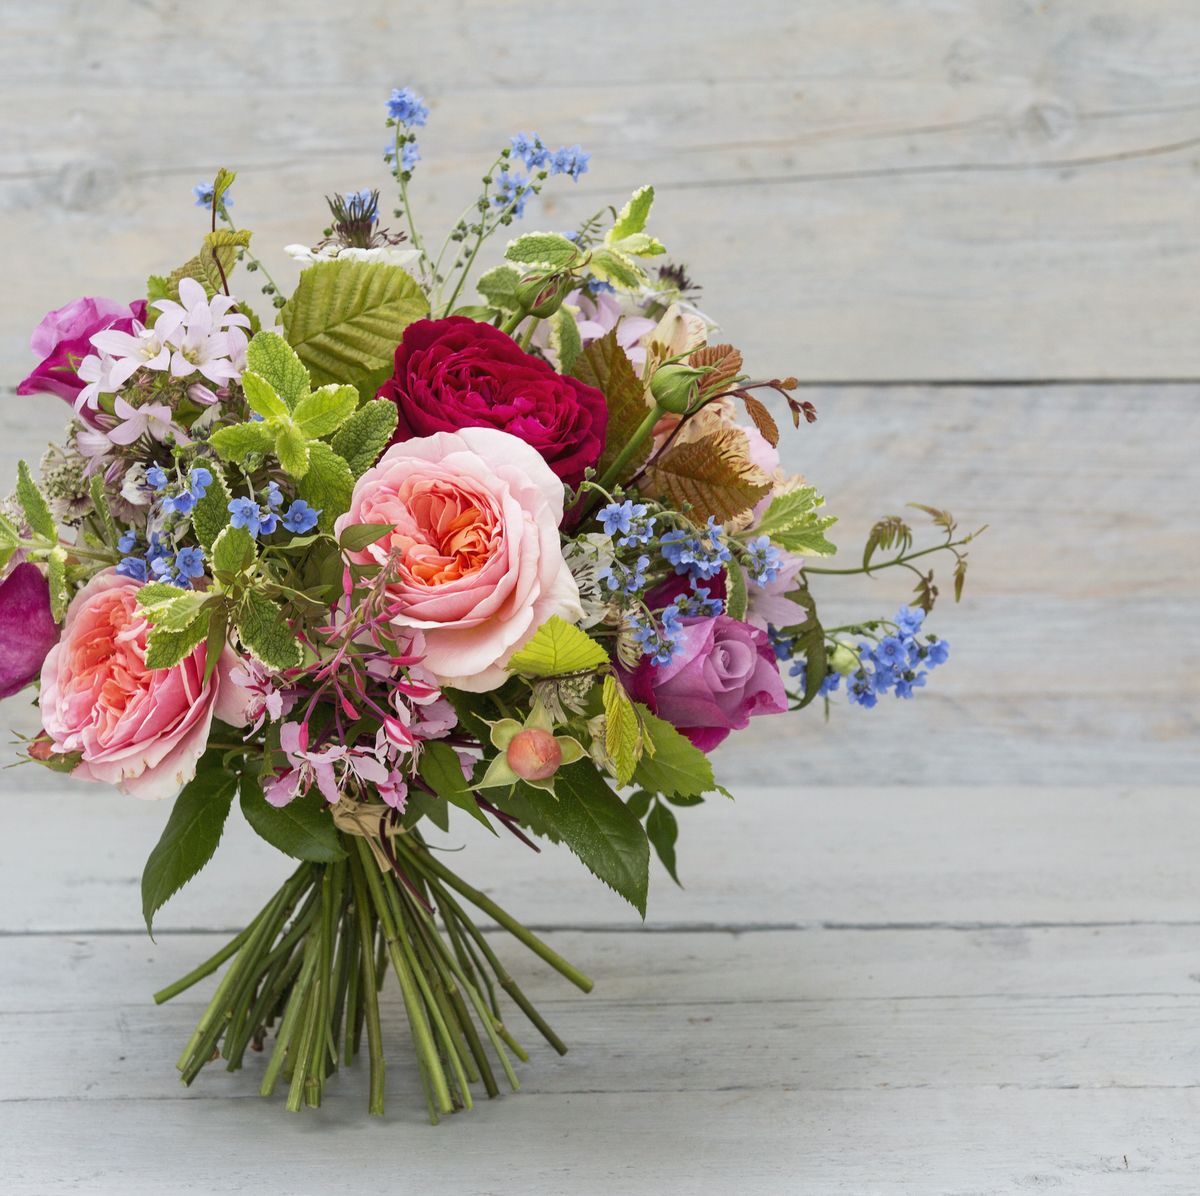 Top Tips for Creating Texture in Floral Designs